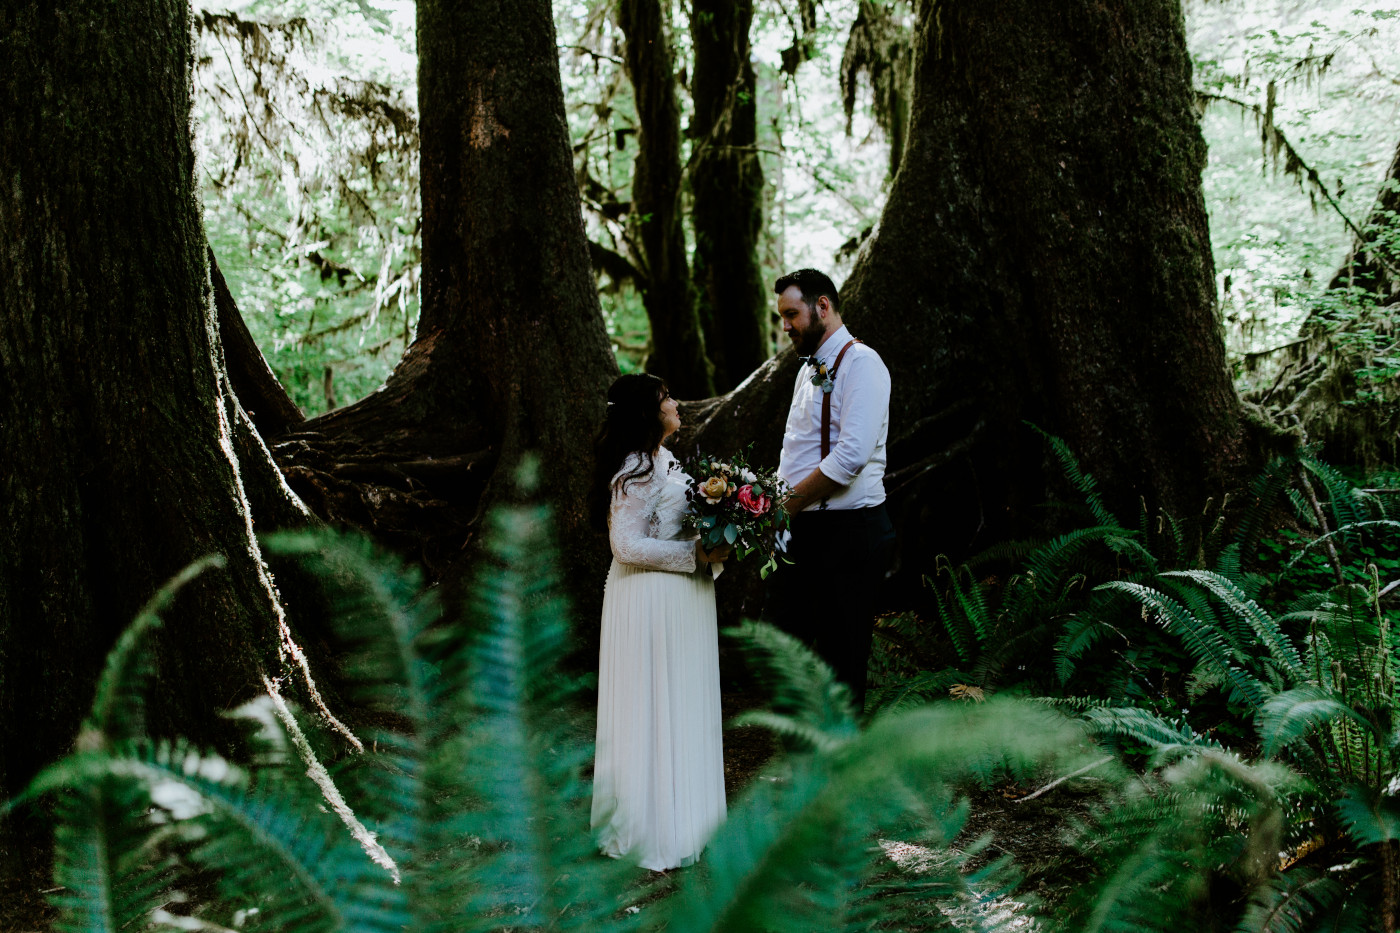 Brooke and Jack stand together in the woods. Elopement photography at Olympic National Park by Sienna Plus Josh.